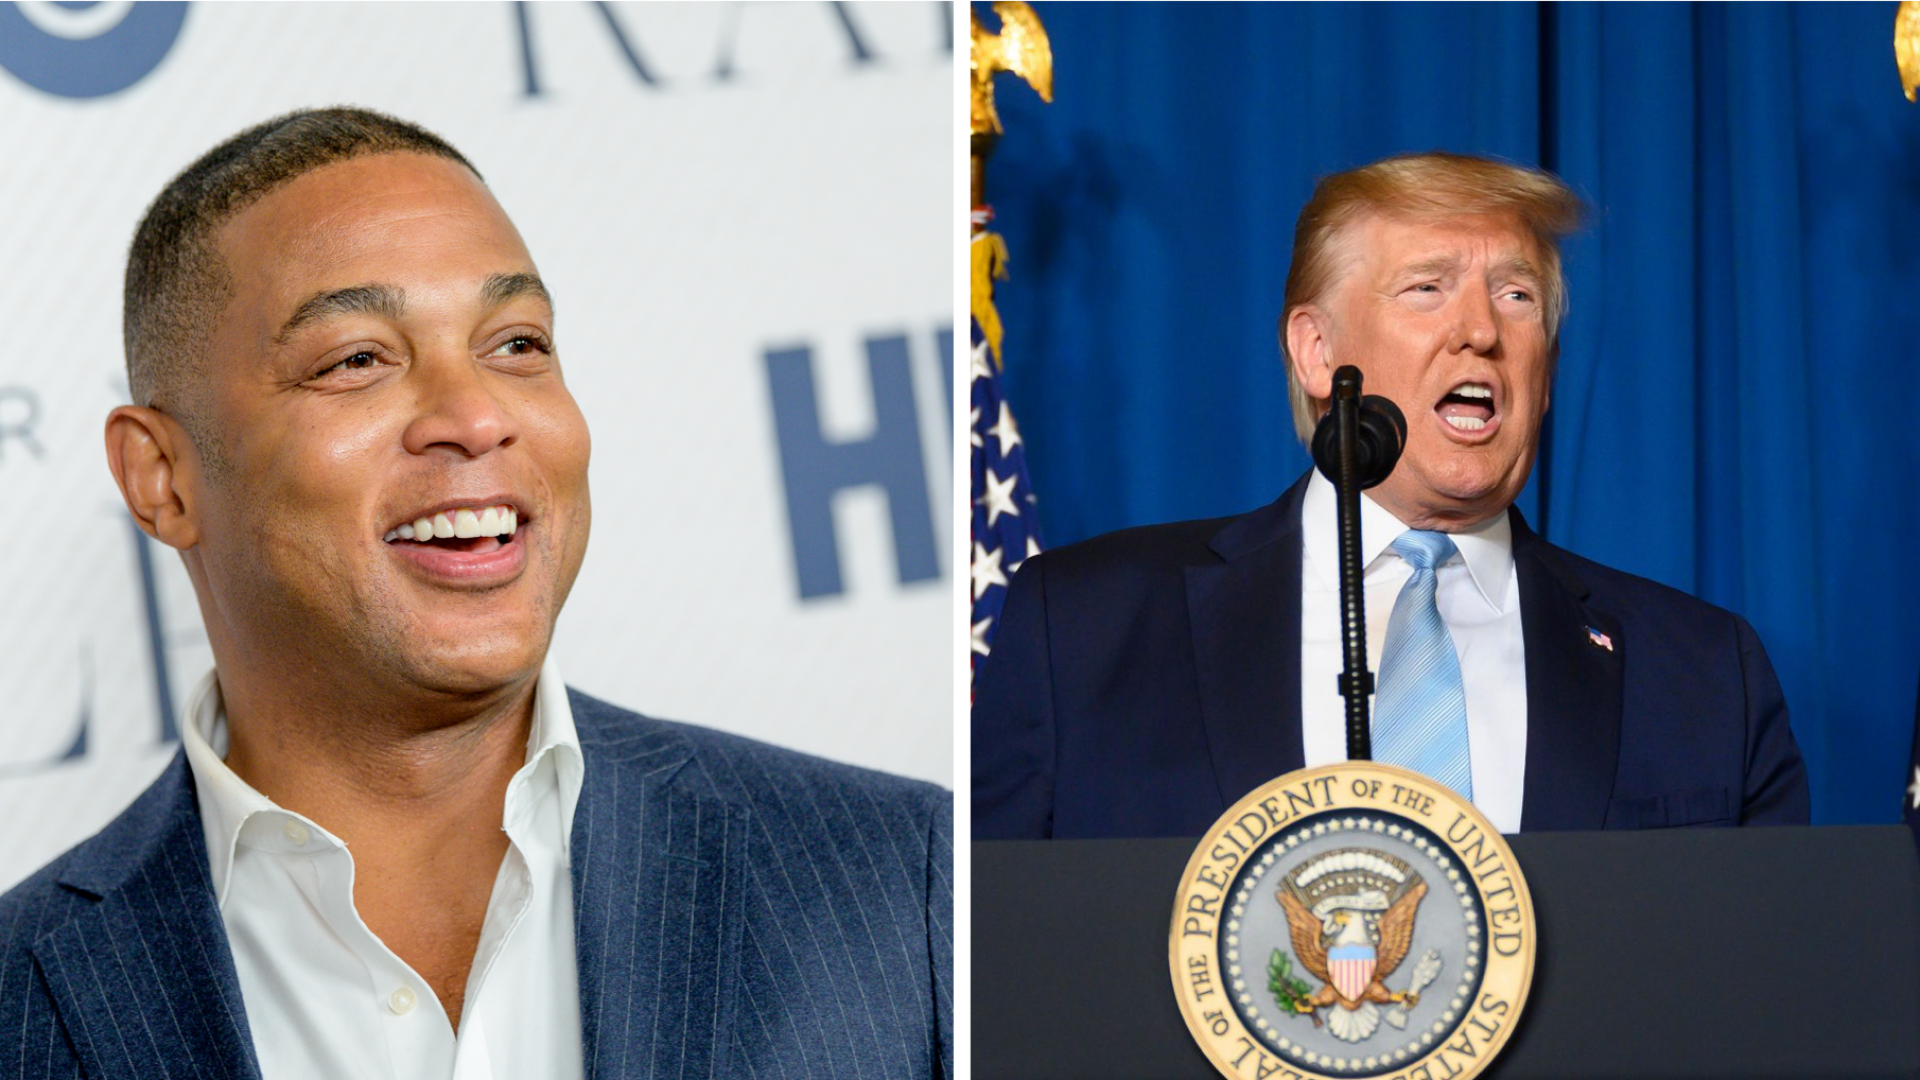 Don Lemon Unleashes On Donald Trump: 'No One Wants To Hear From Birther-in-Chief'